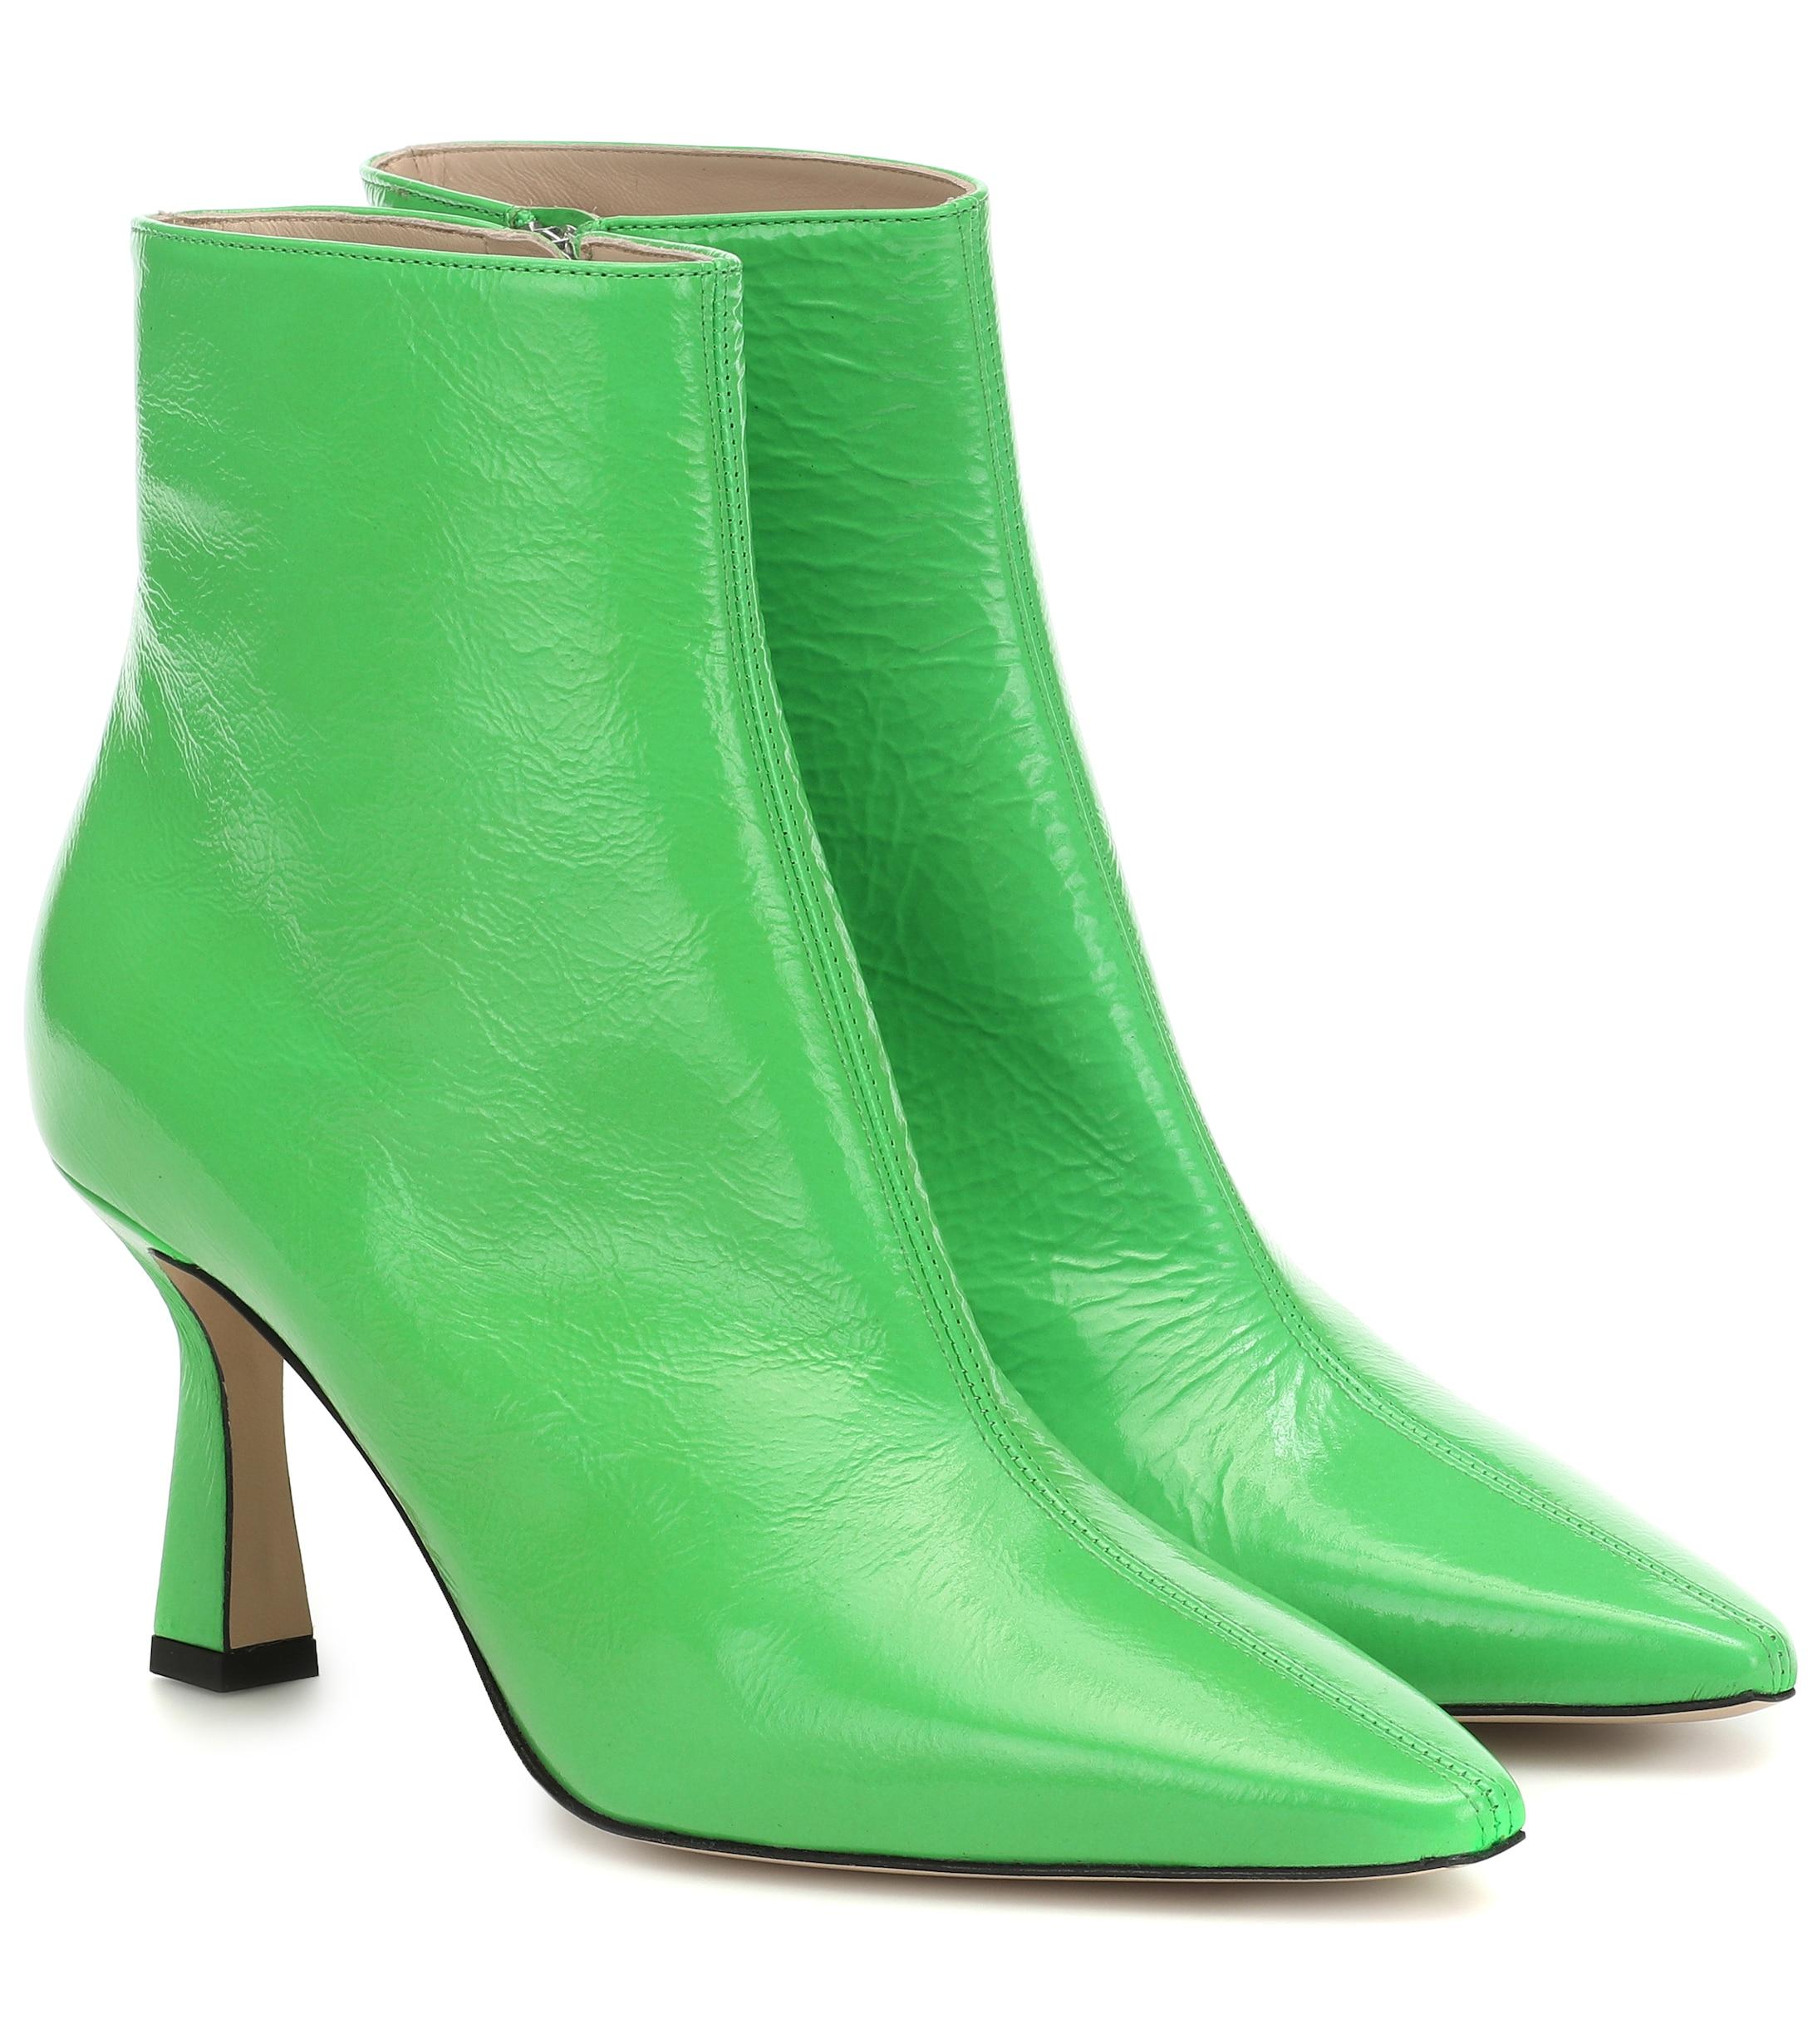 Wandler Exclusive To Mytheresa – Lina Patent Leather Ankle Boots in ...